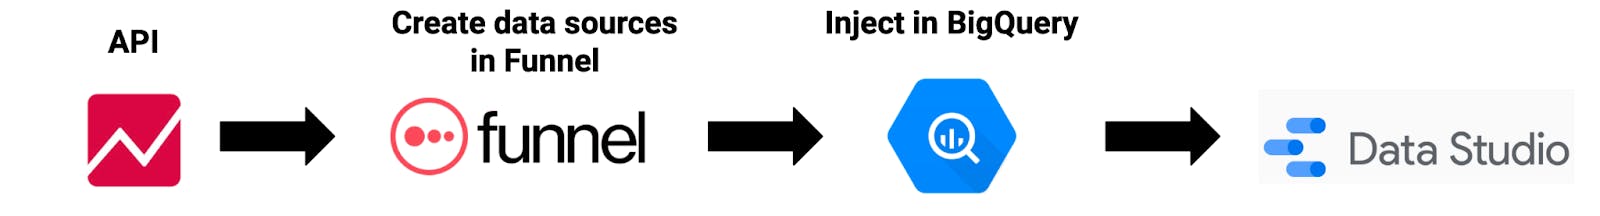 Image - The process that Deezer found to speed up their data processing and regrouping with AppTweak’s API 